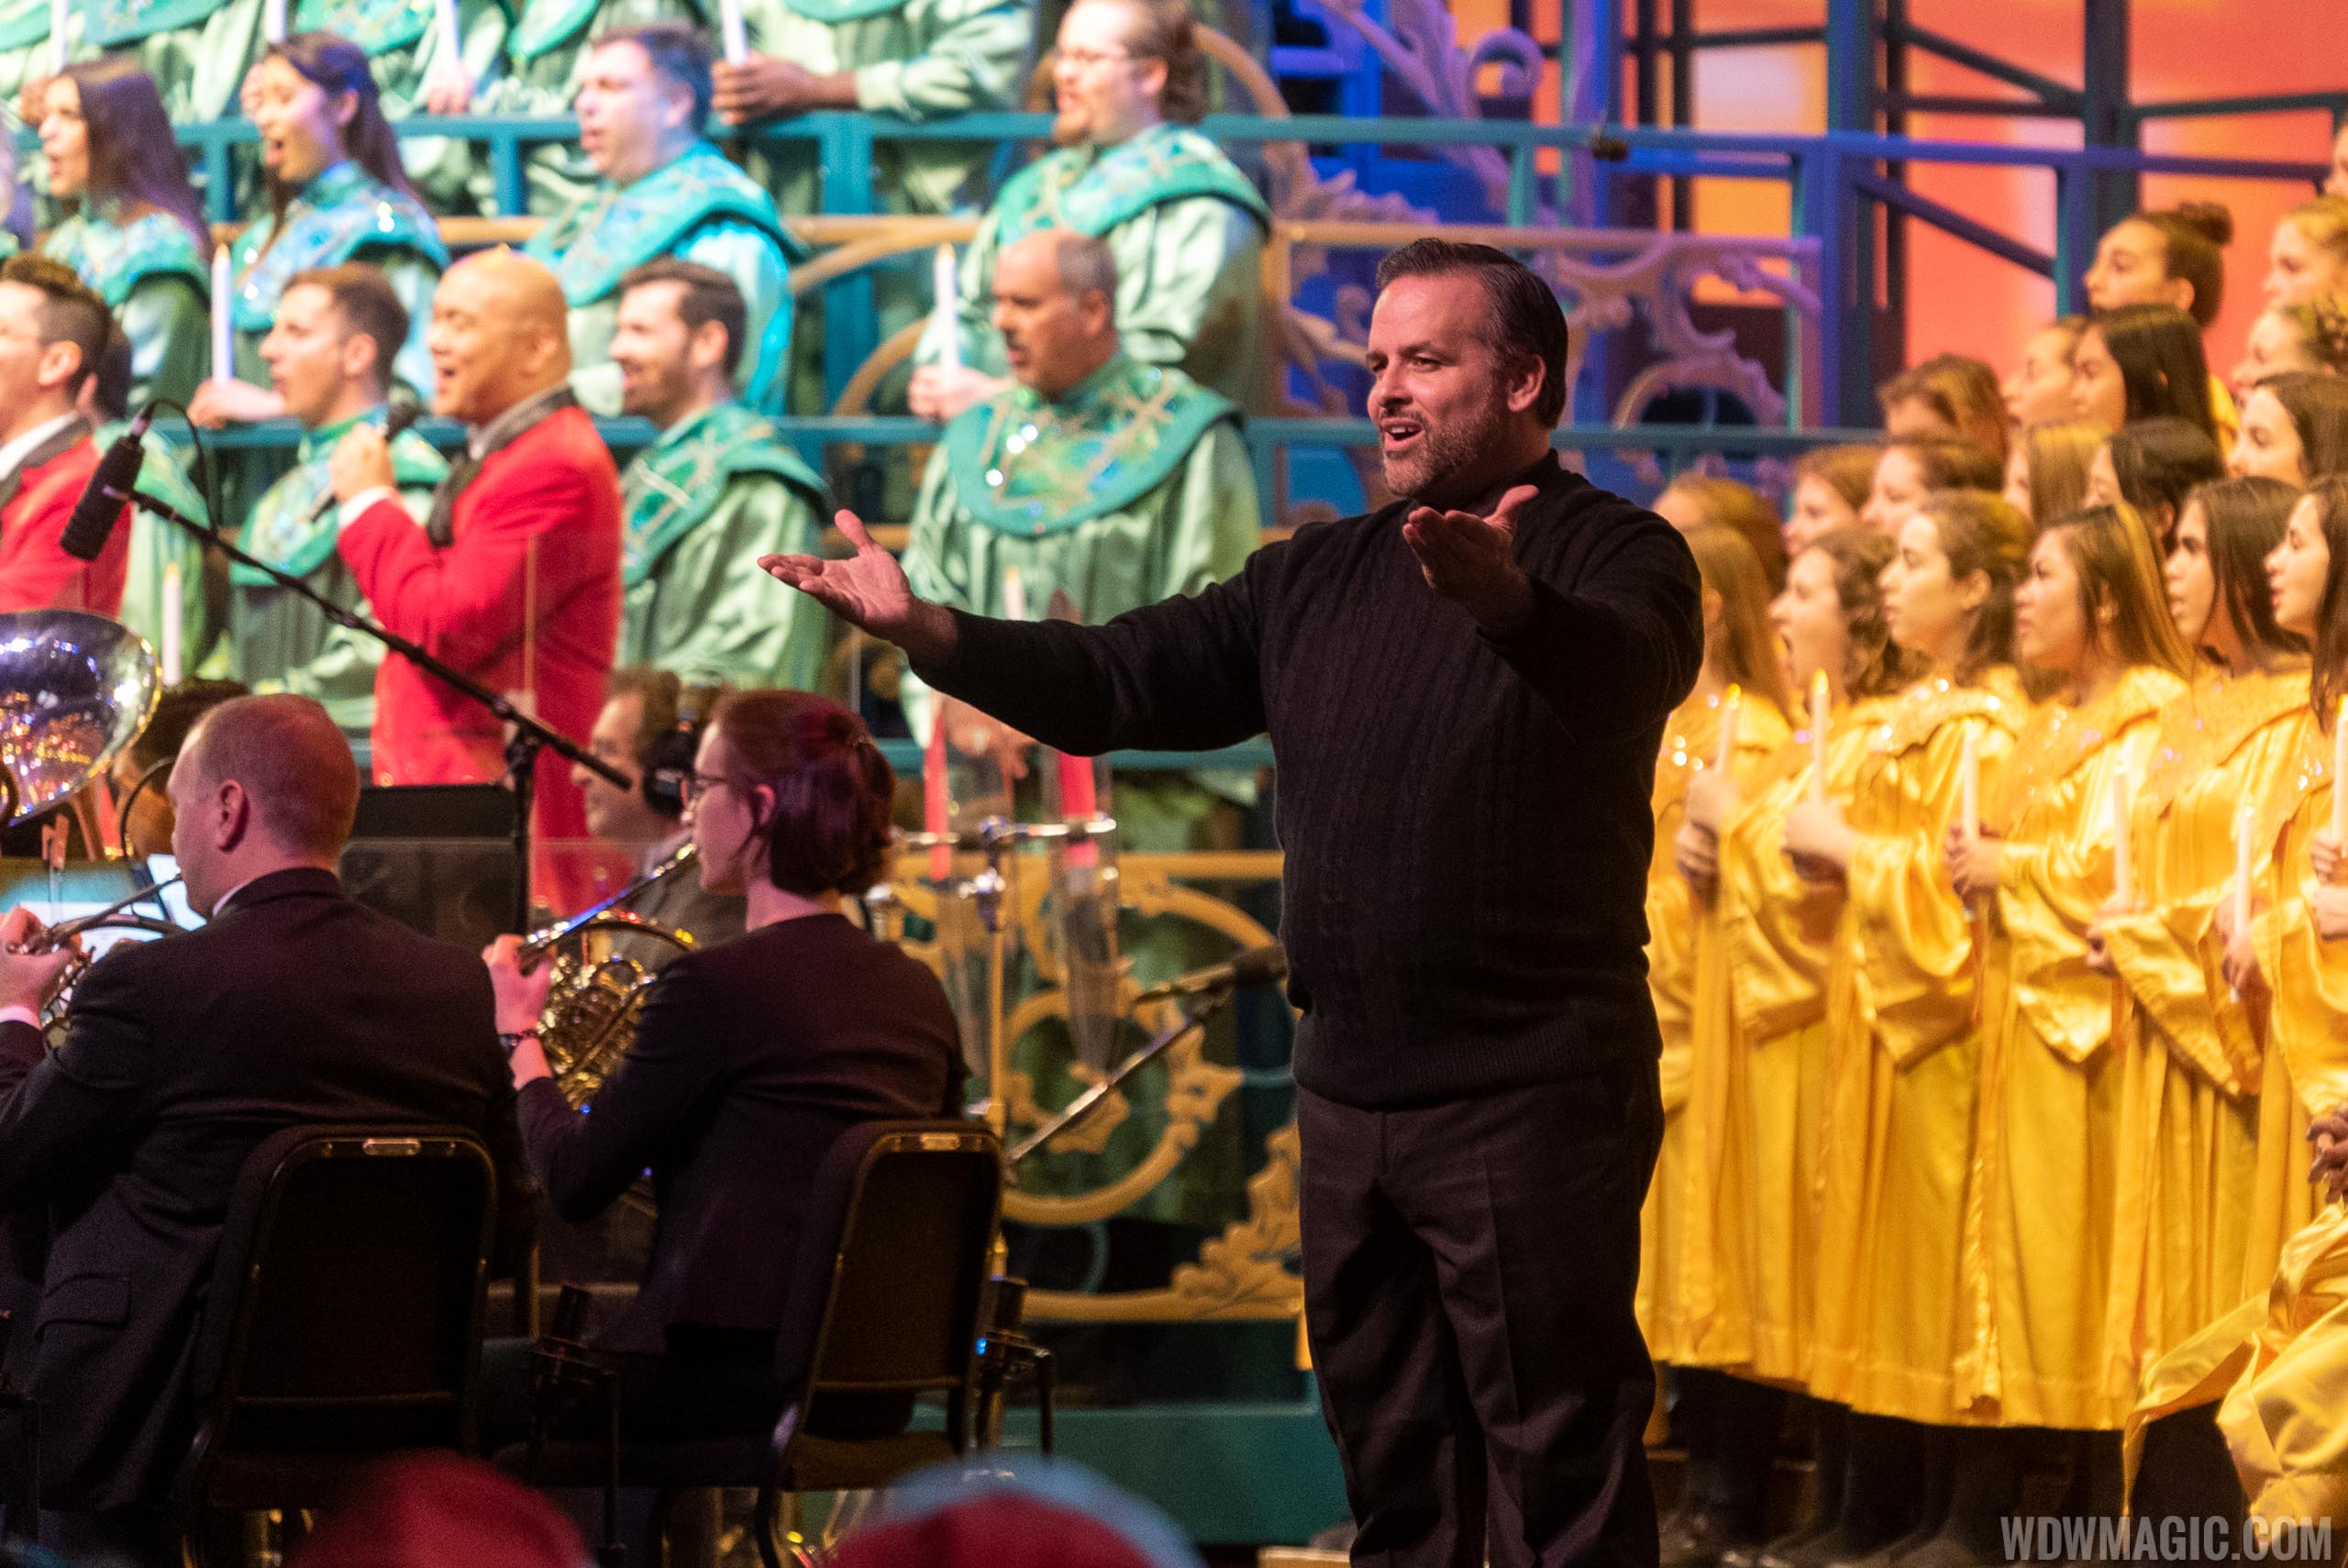 candlelight processional 2021